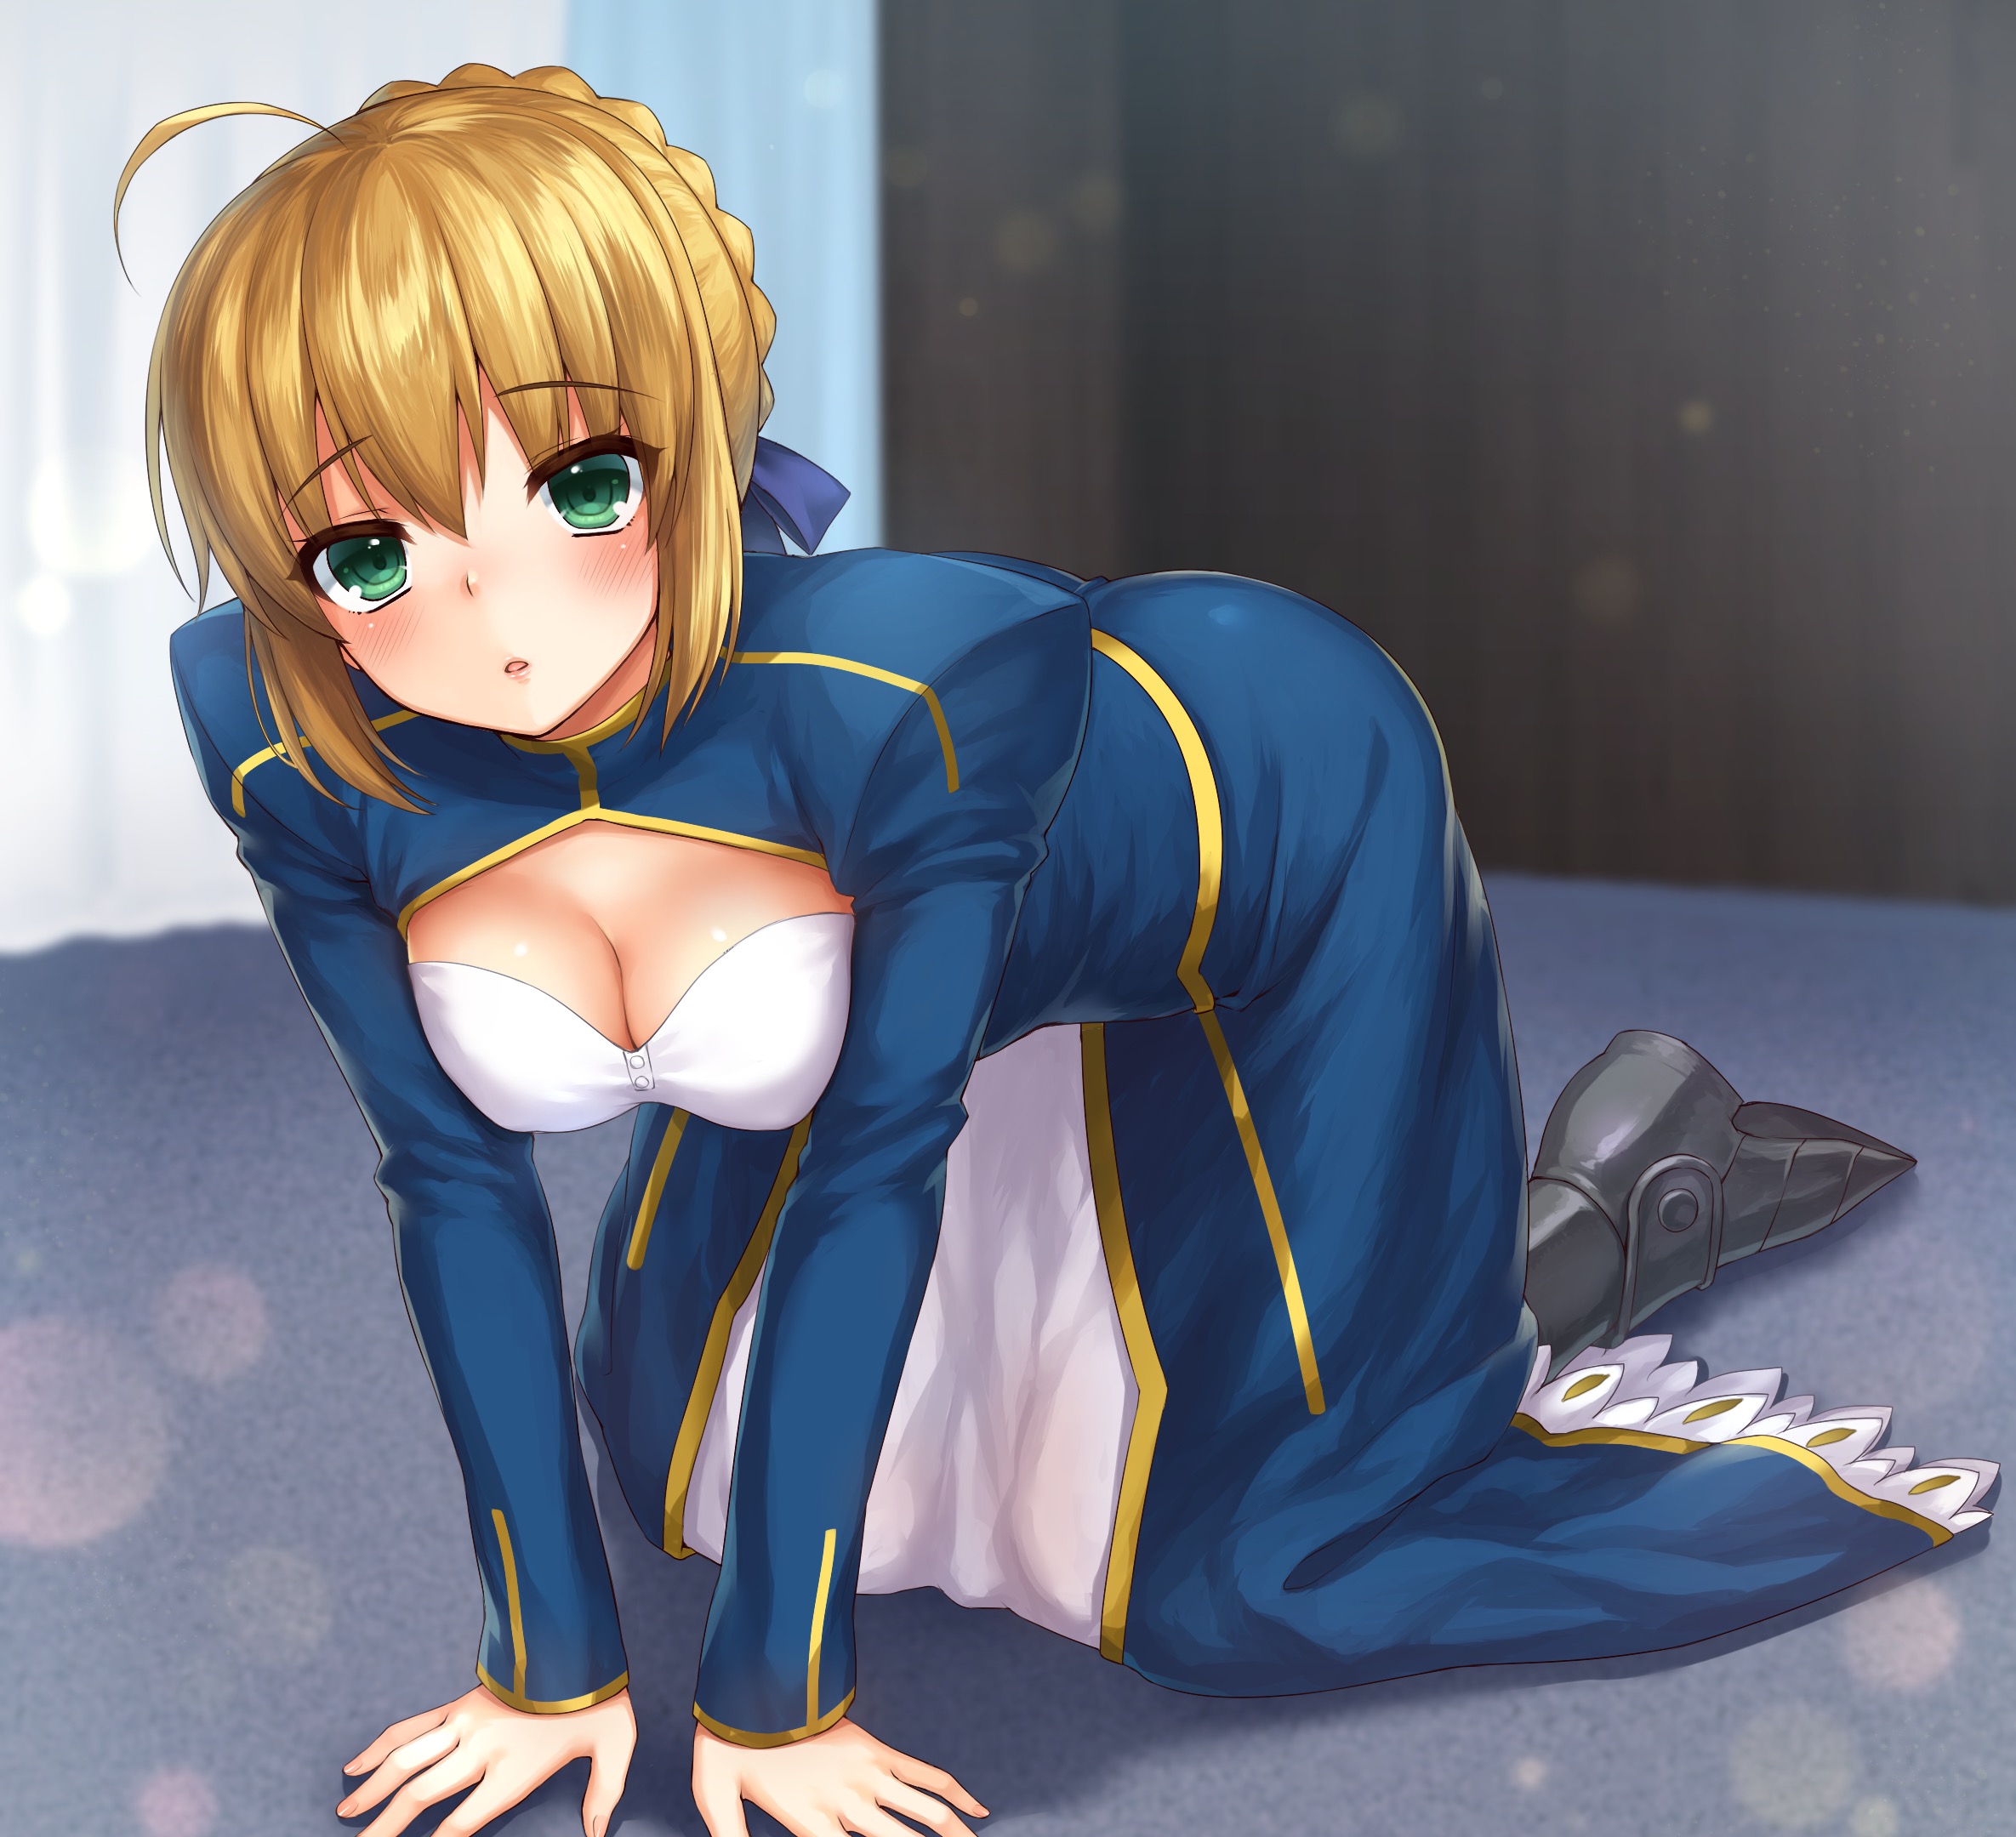 Anime 2370x2160 Fate series Fate/Stay Night anime girls Saber blonde